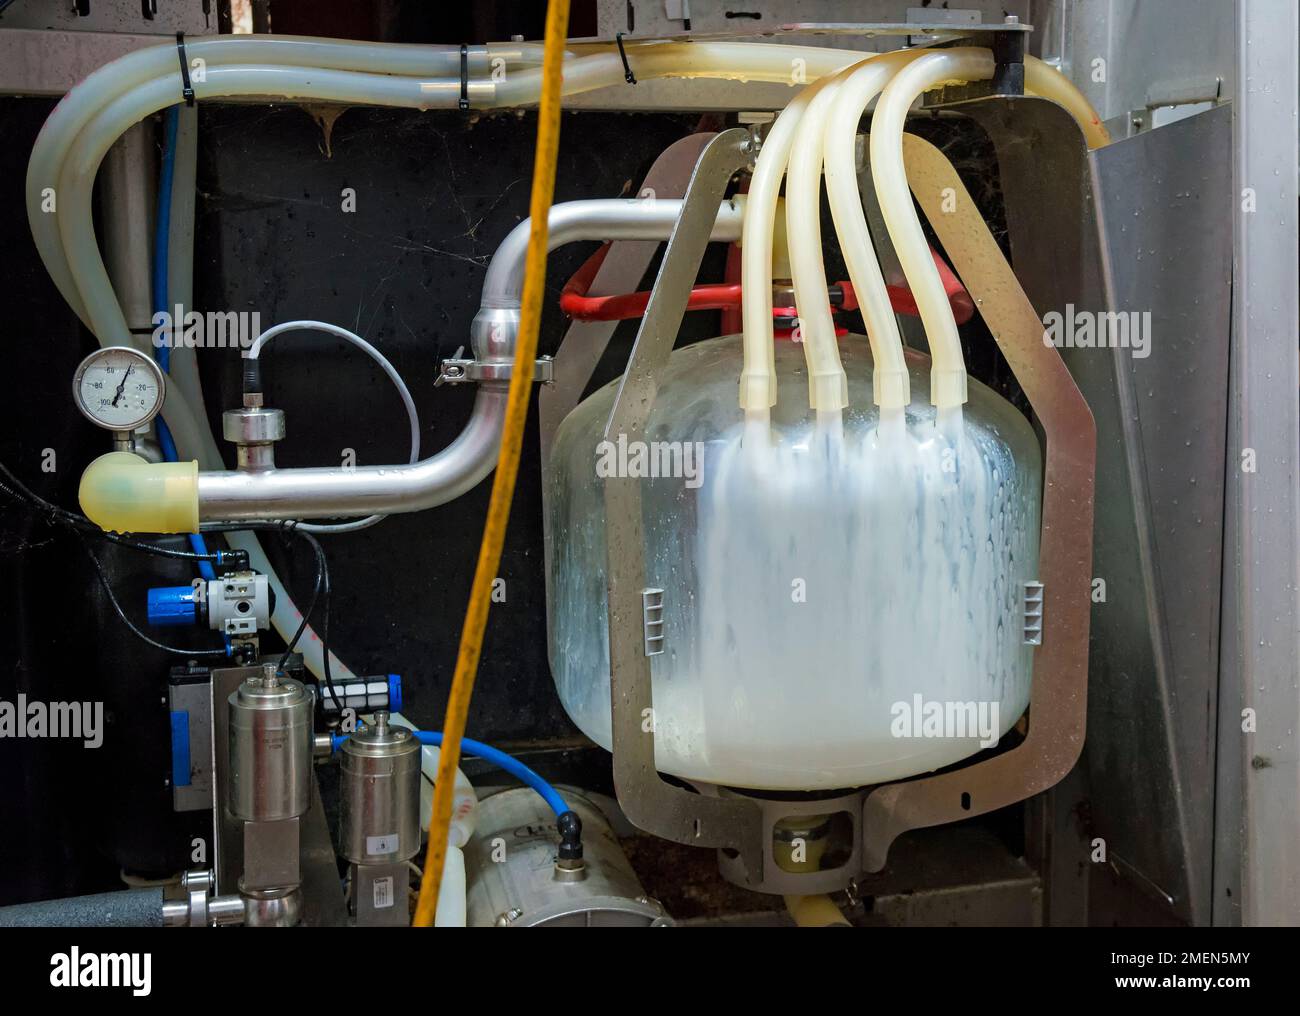 Automated milk collection machine at a dairy farm. Four hoses attached to clear collection bottle. Focus on milk bottle. Stock Photo